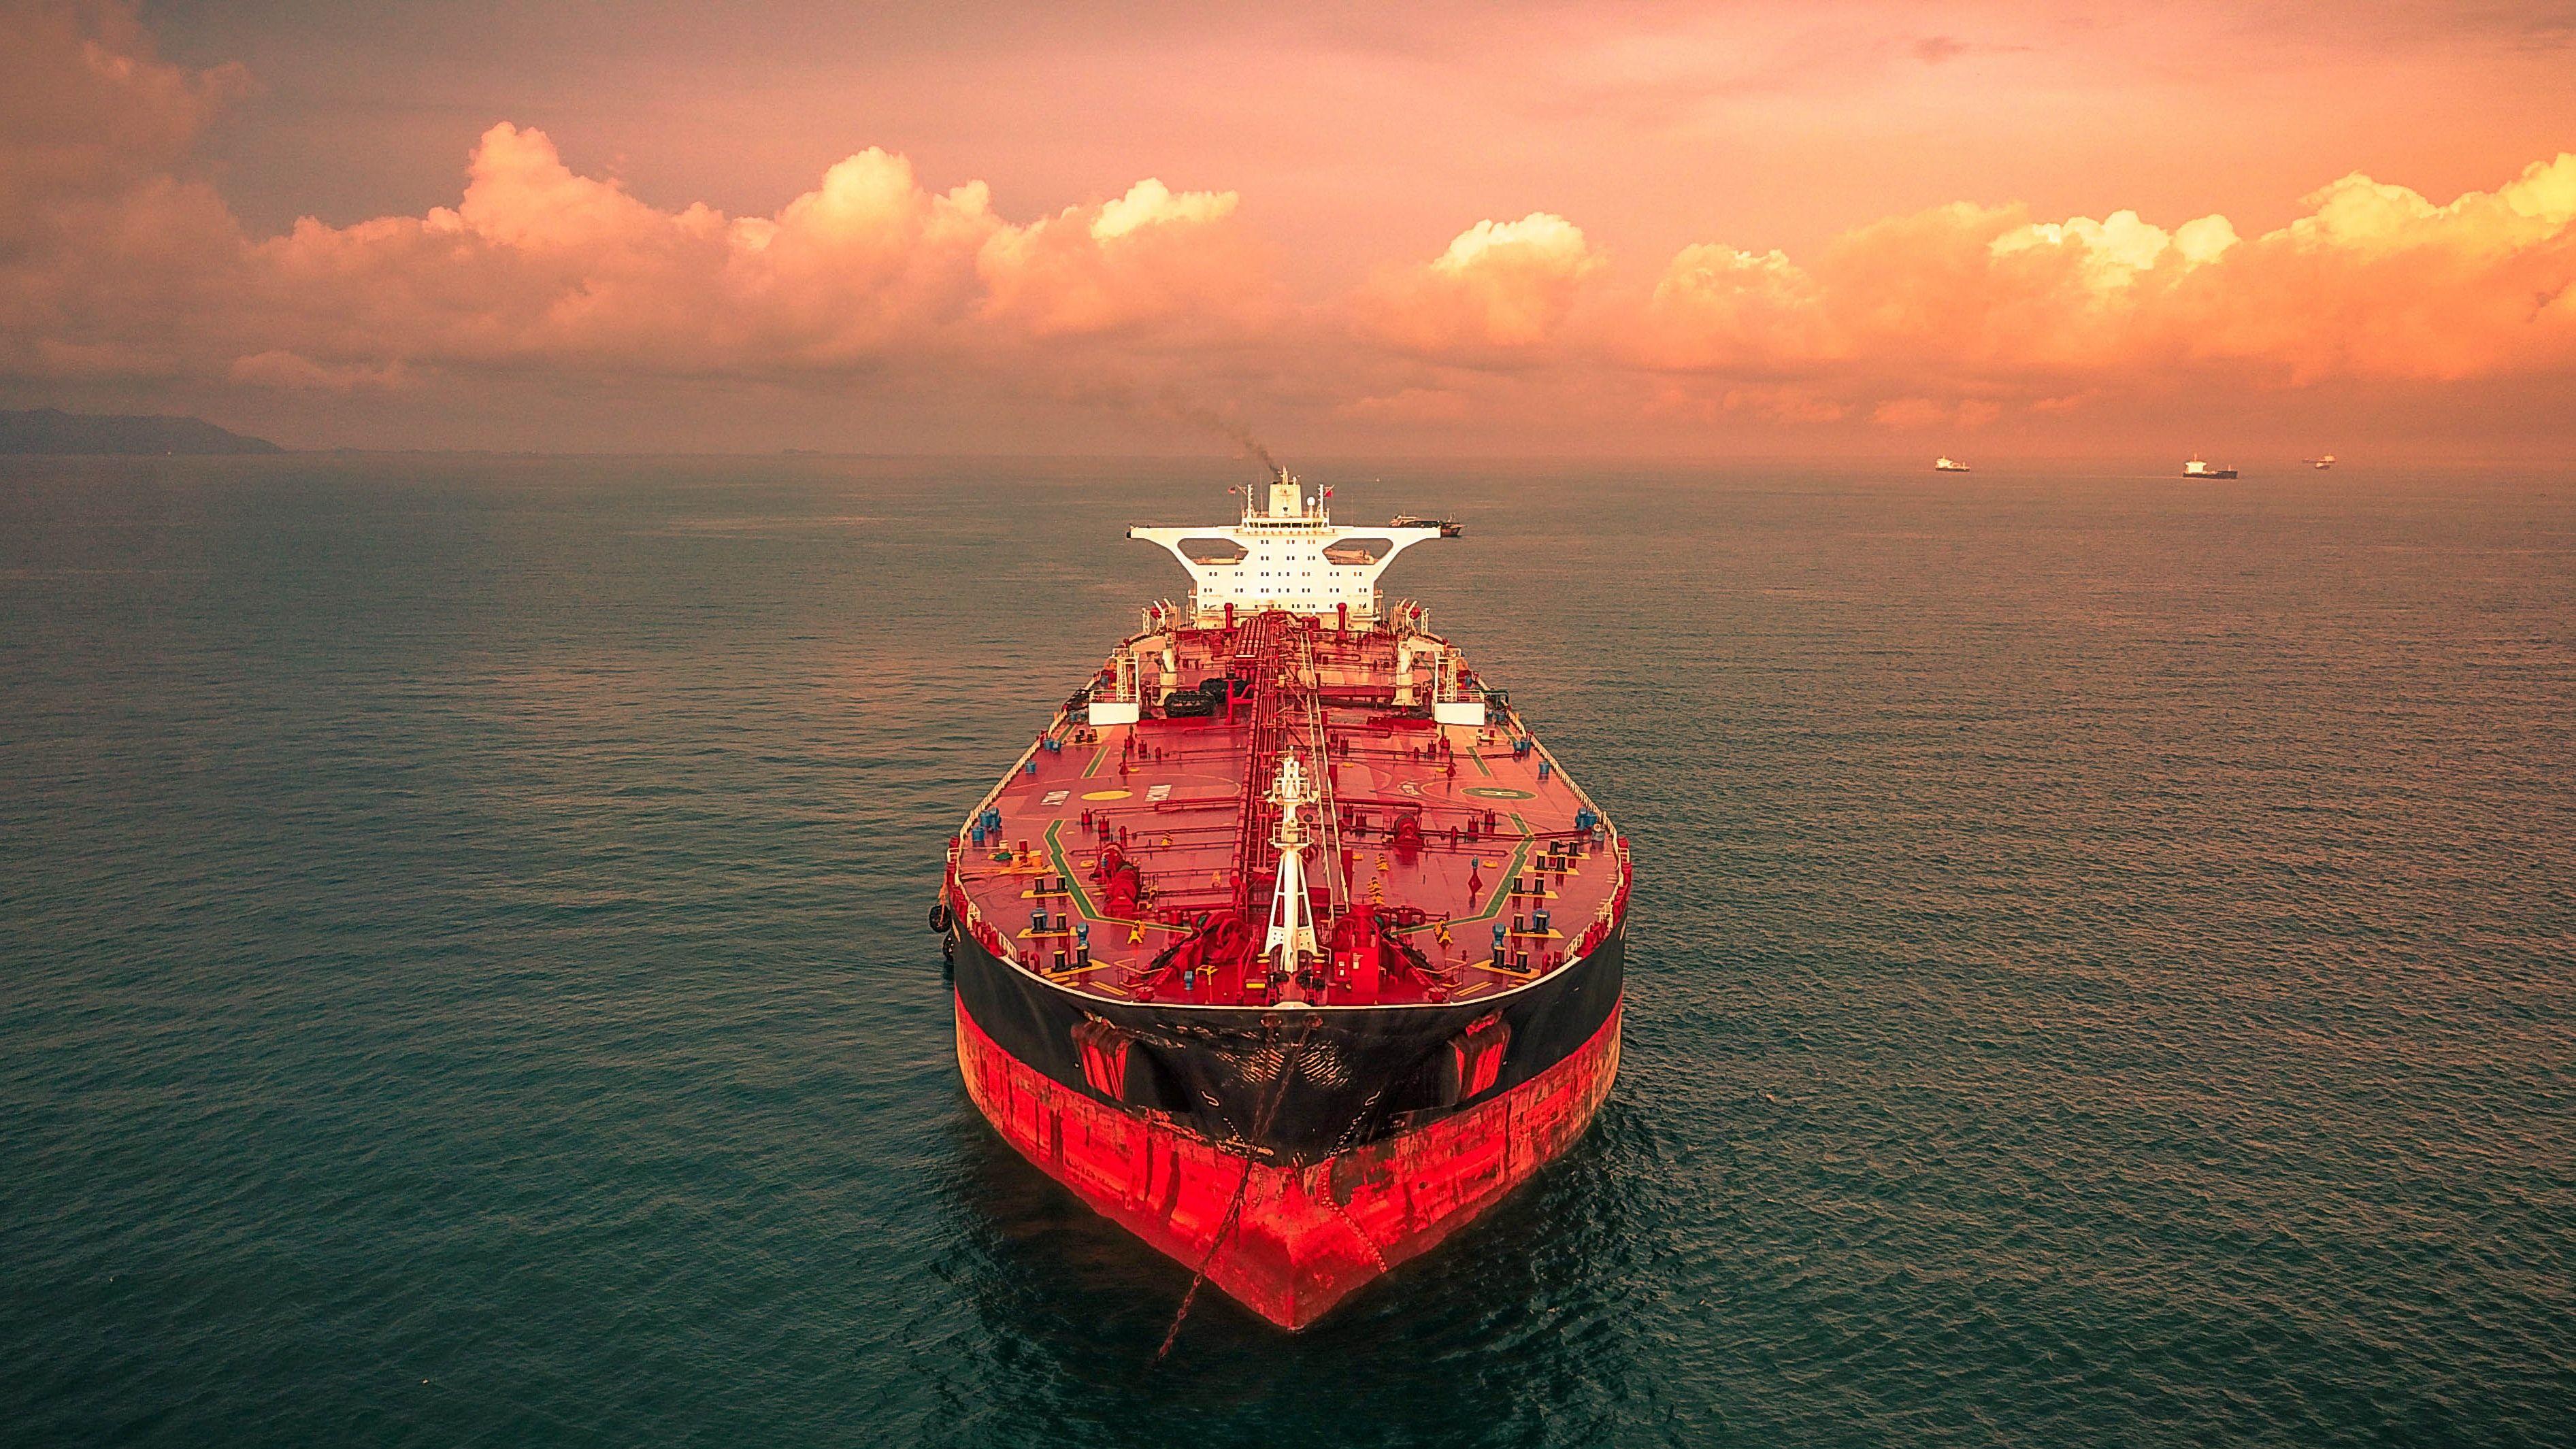 Marine Dynamic Risk Assessment: How to Sail Safety Over Seas